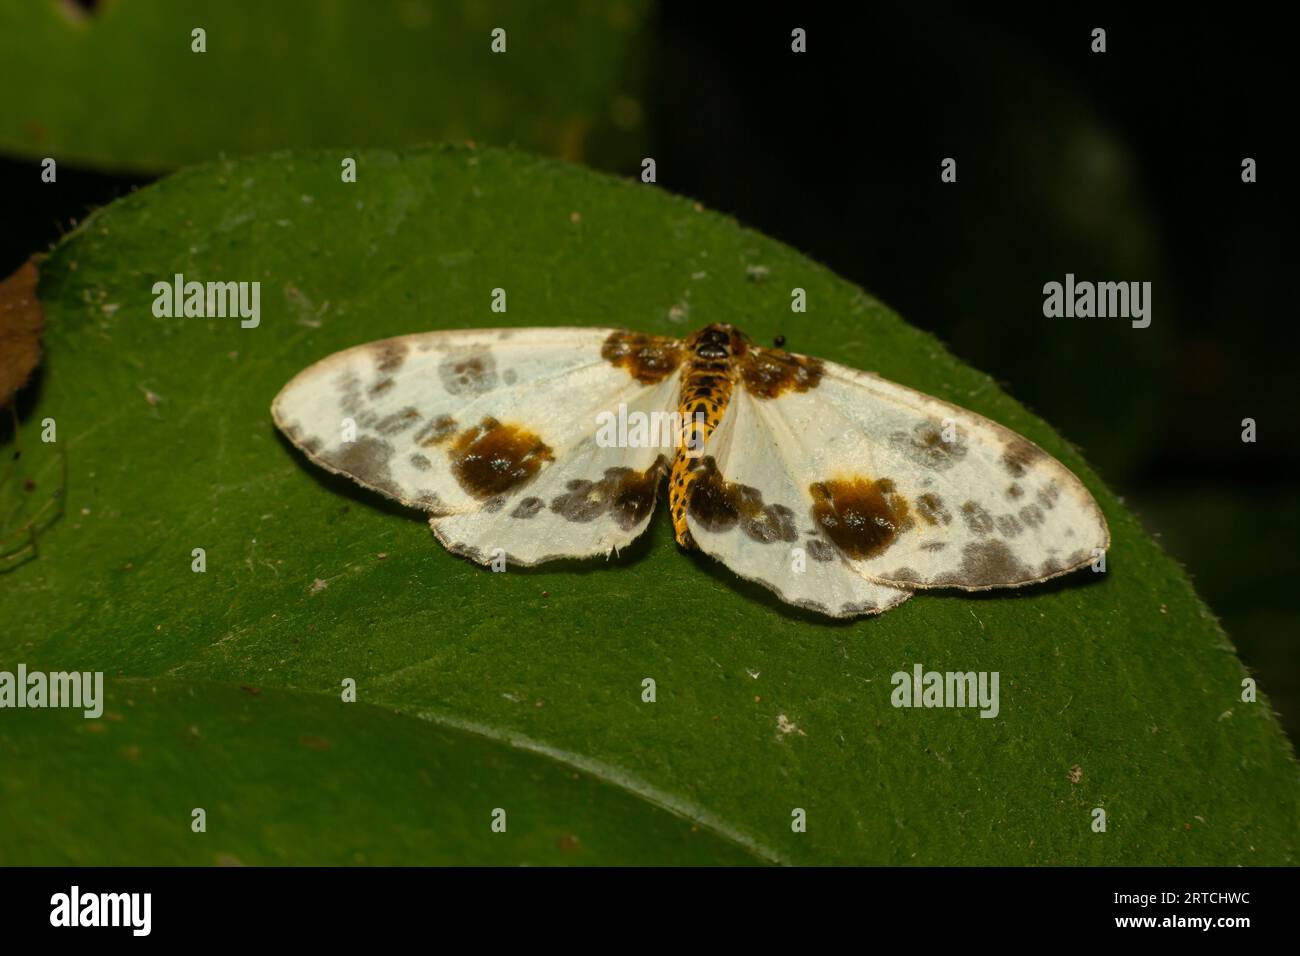 Spotted butterfly abraxas sylvata broadly spread its wings with brown spots. Stock Photo